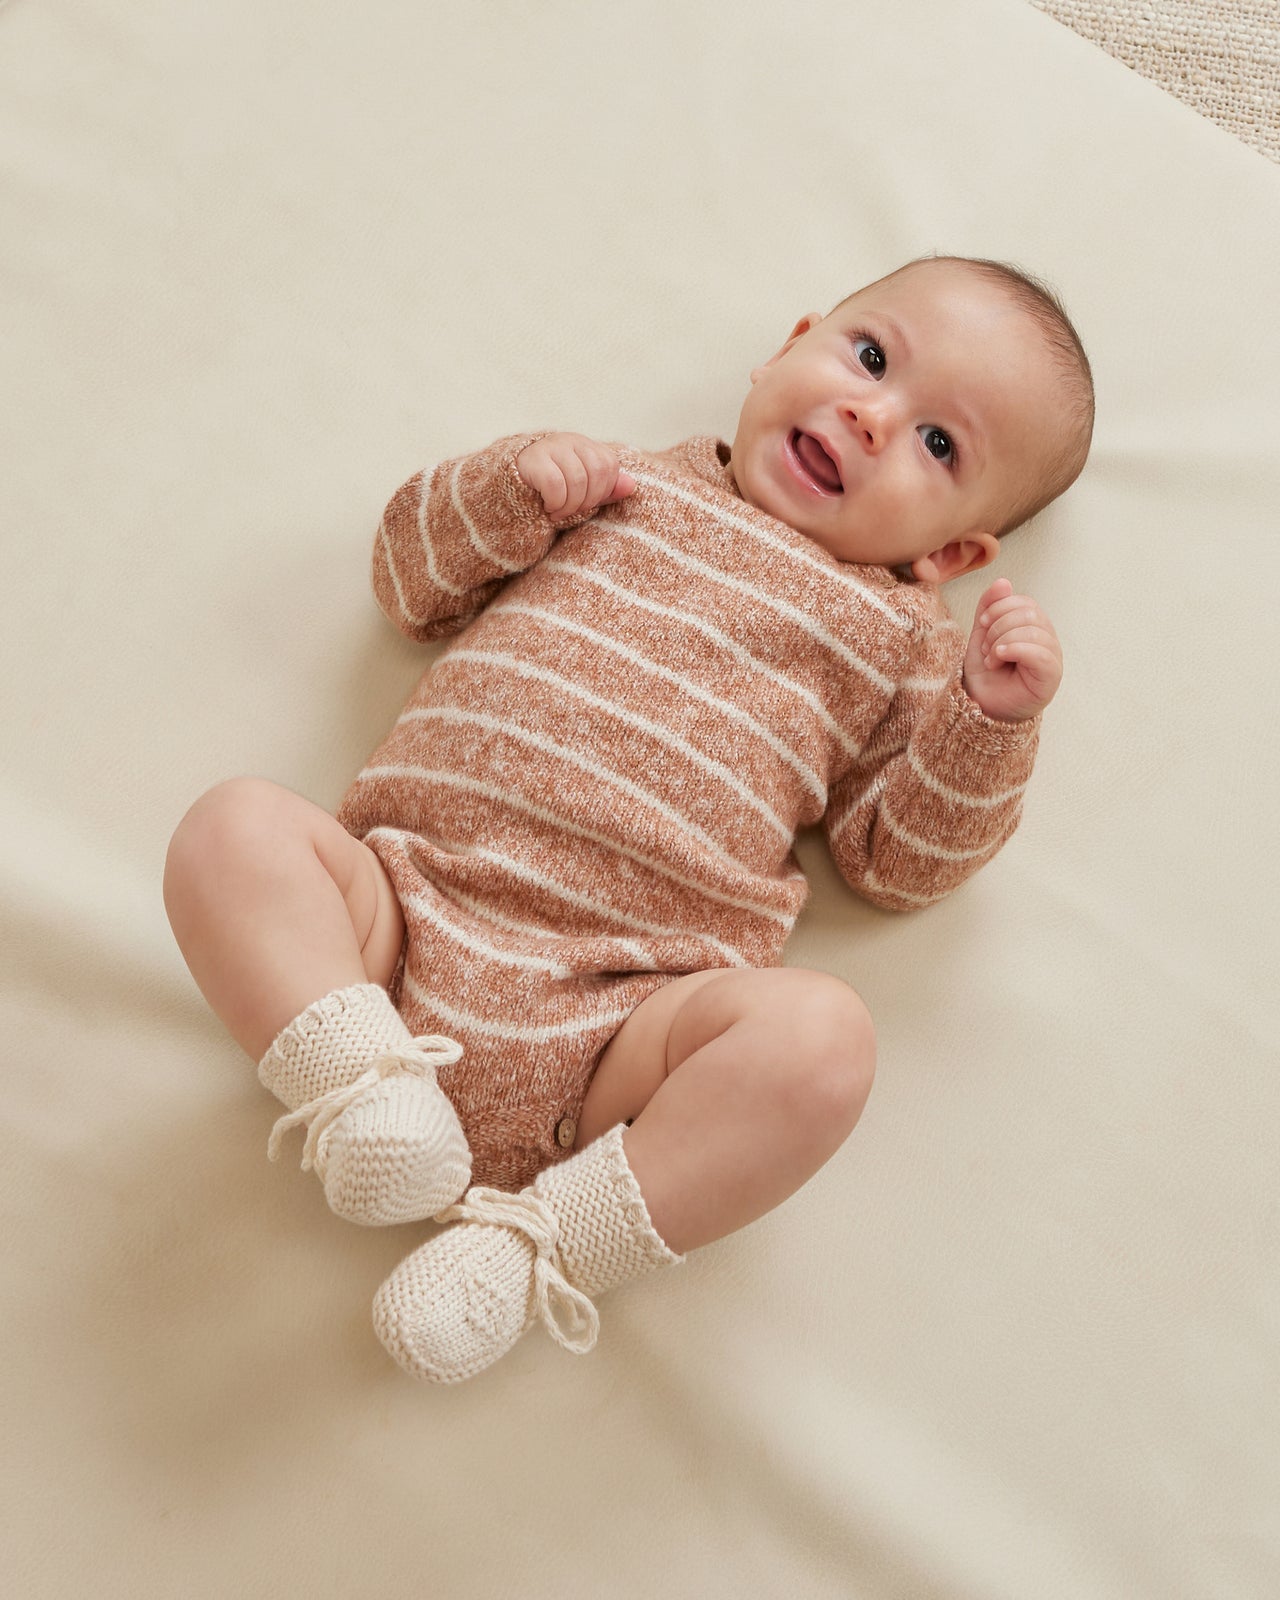 Quincy Mae Knit Booties, Sand